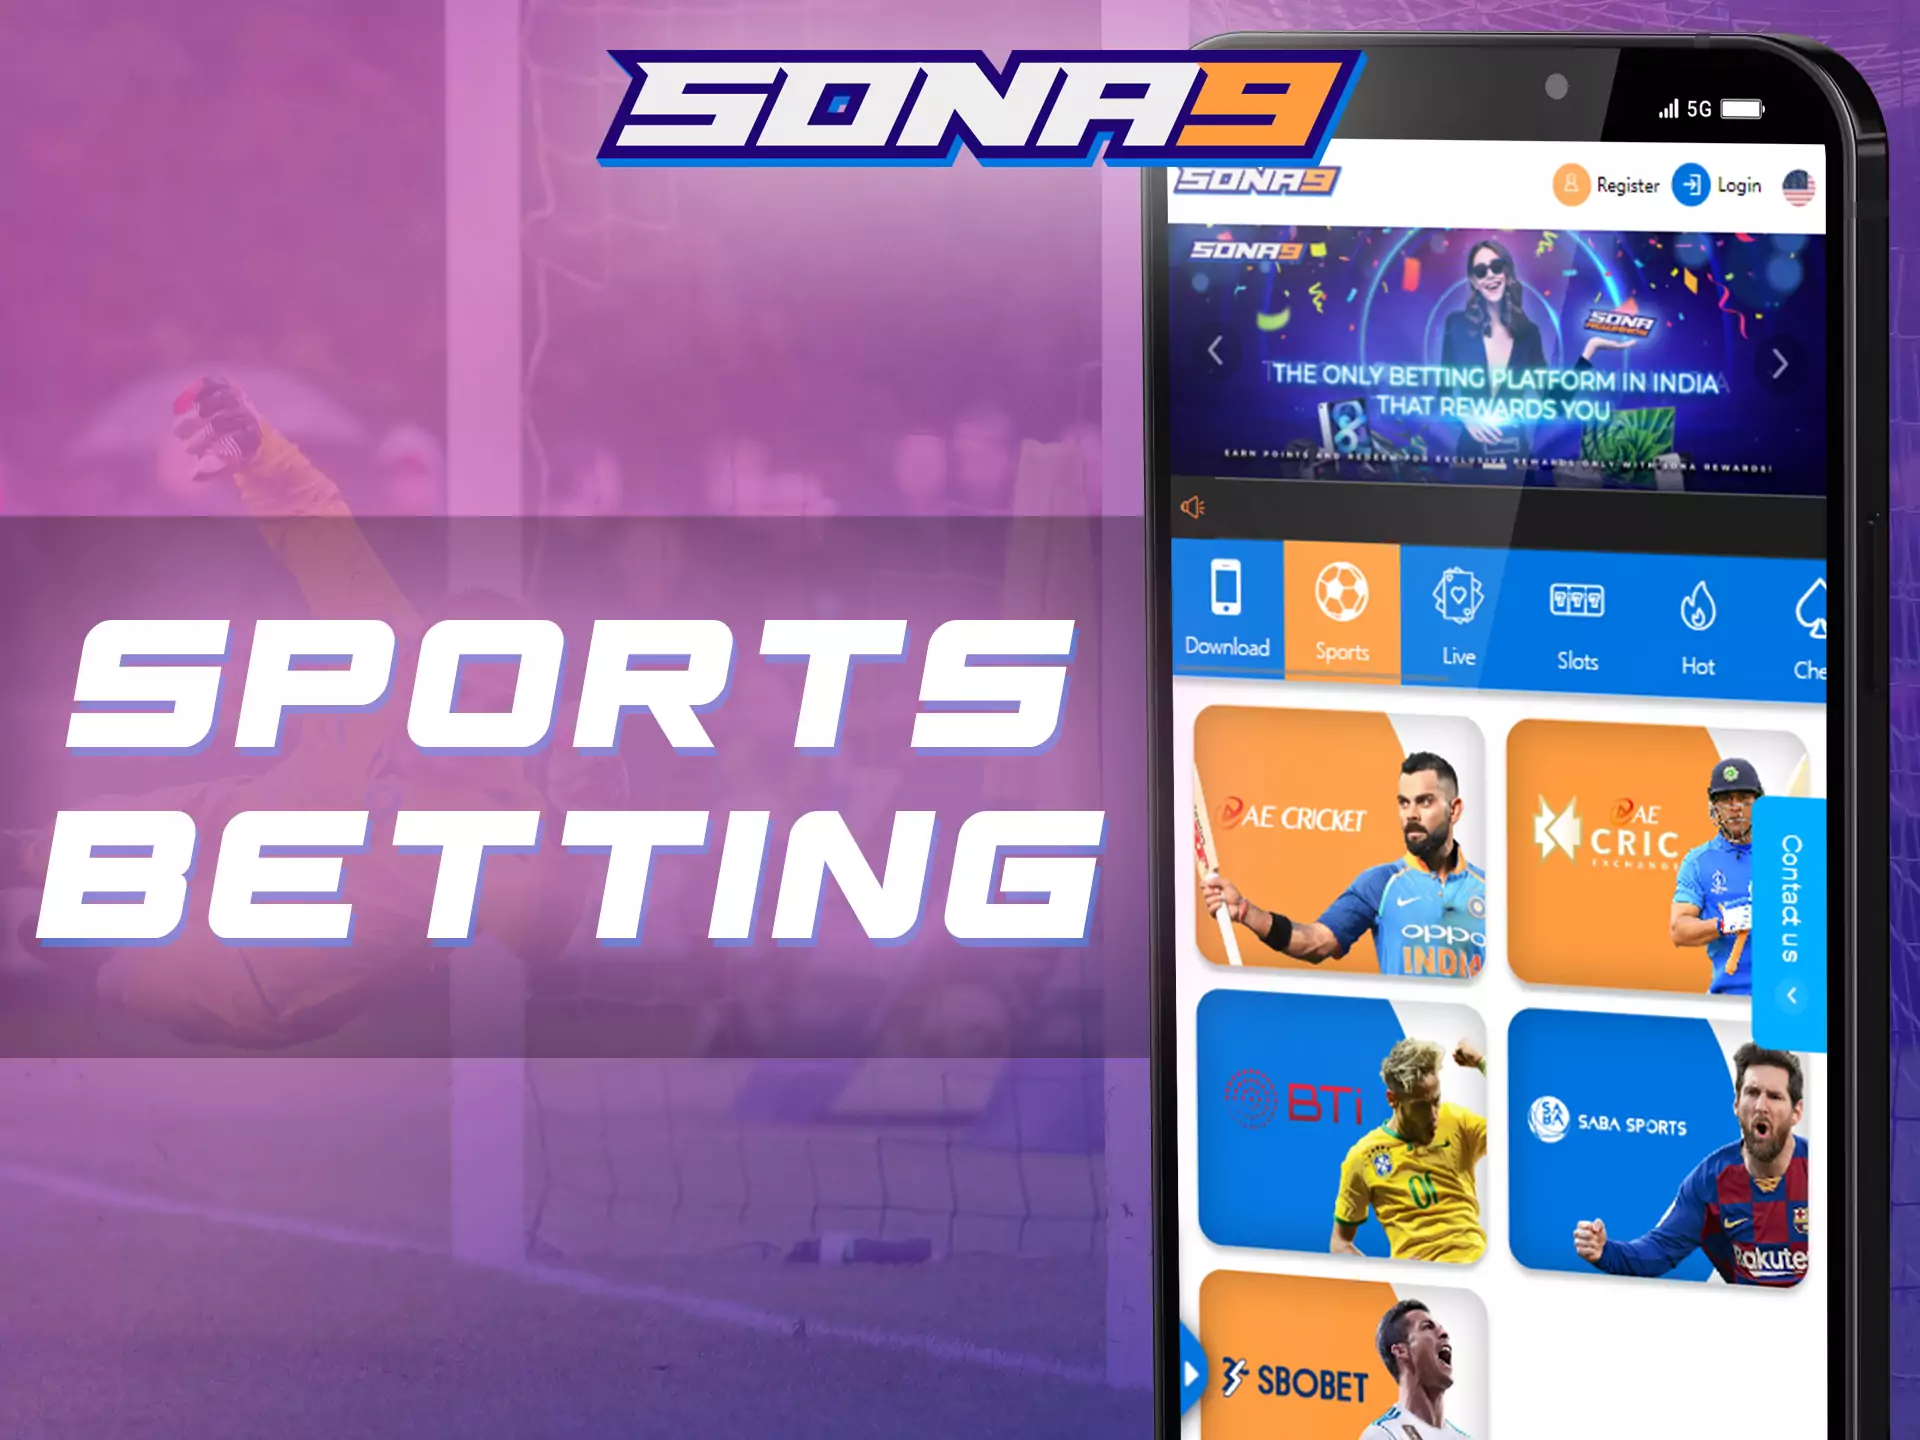 In the Sona9 app, there is a sportsbook where you can place bets.